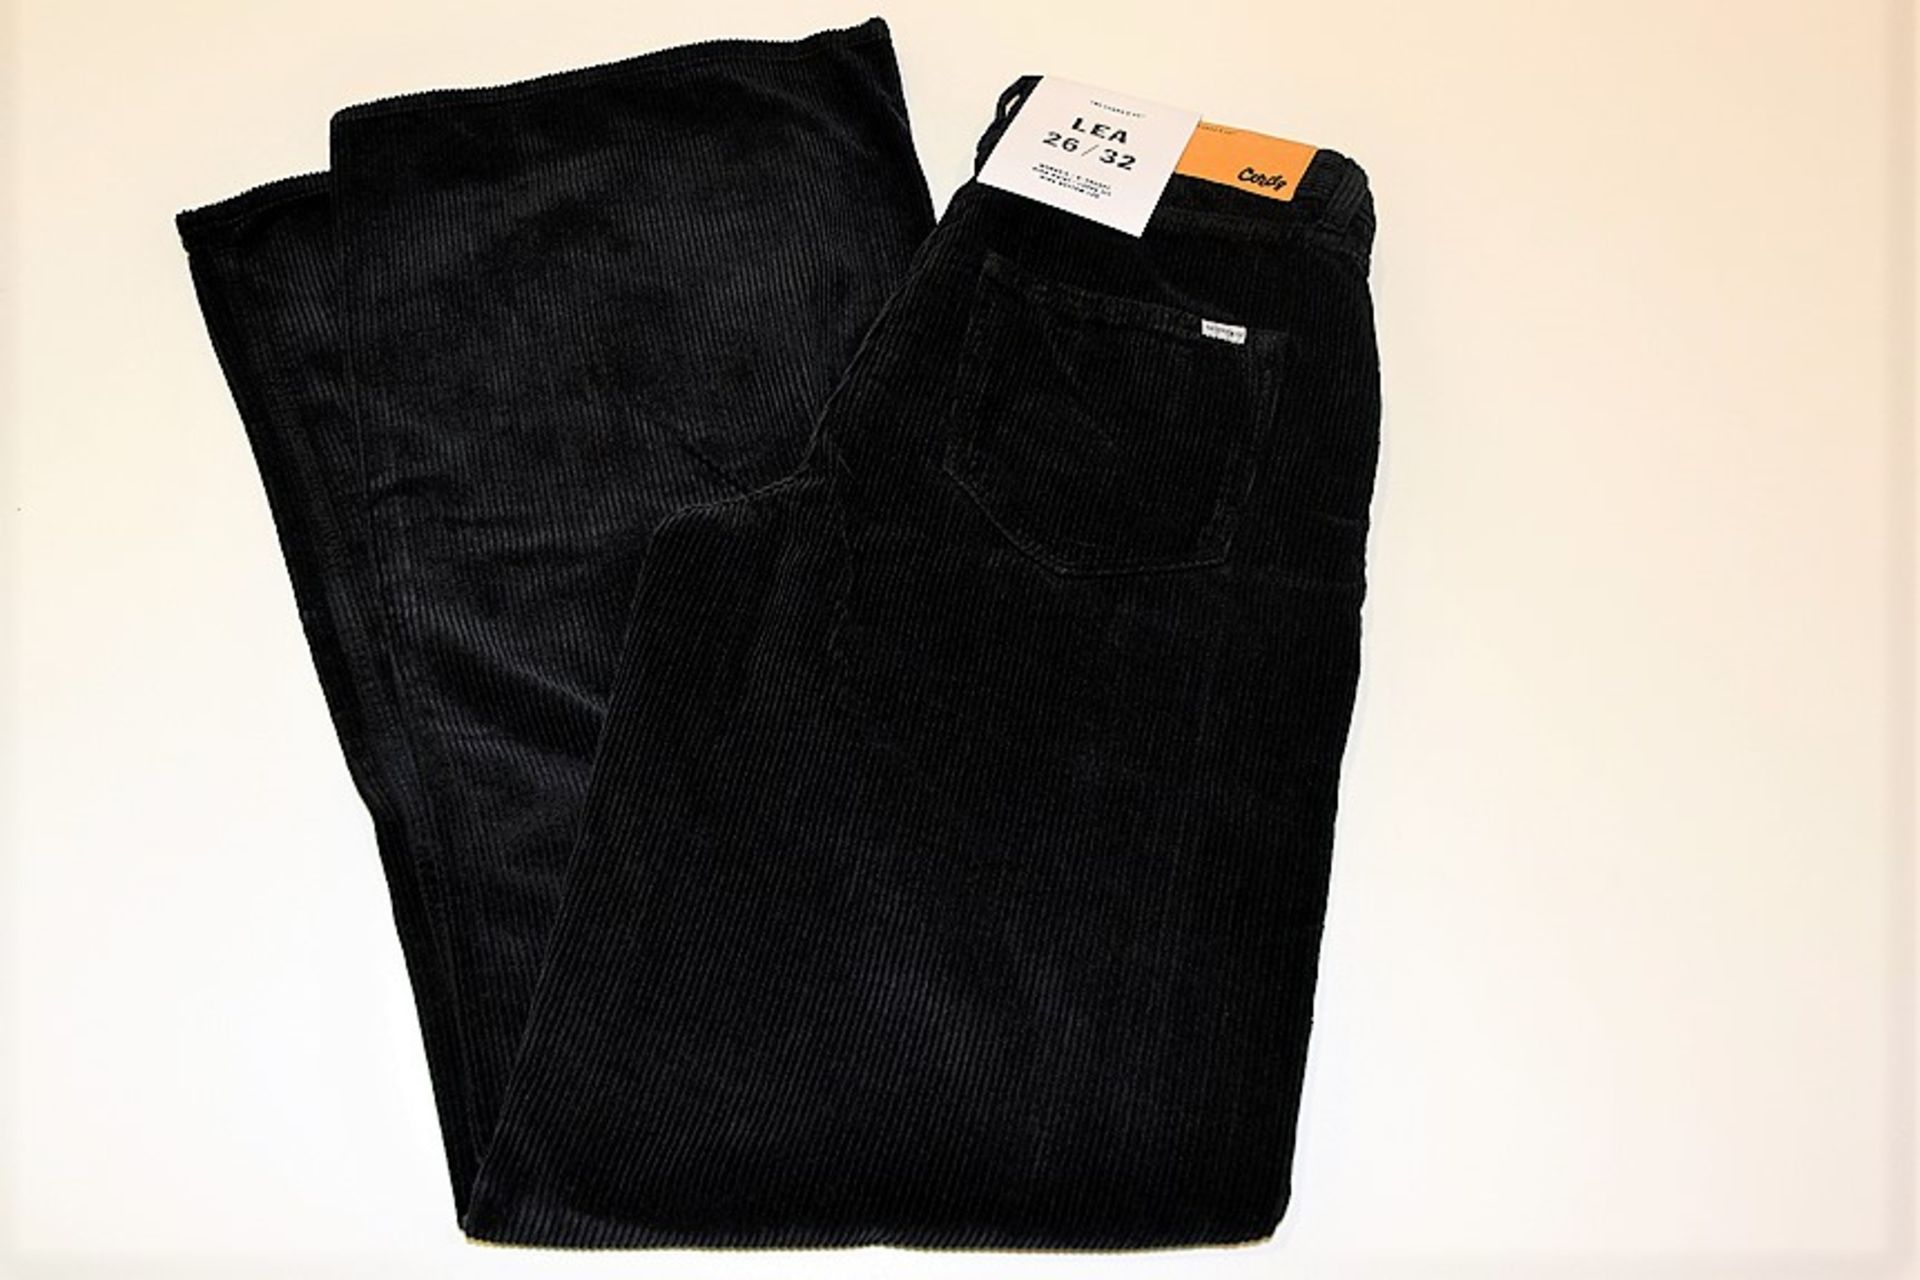 The Cords & Co. "Lea" Women's/ High-Waist/ Loose Fit/ Wide Bottom Pants MSRP $160 - Image 3 of 7